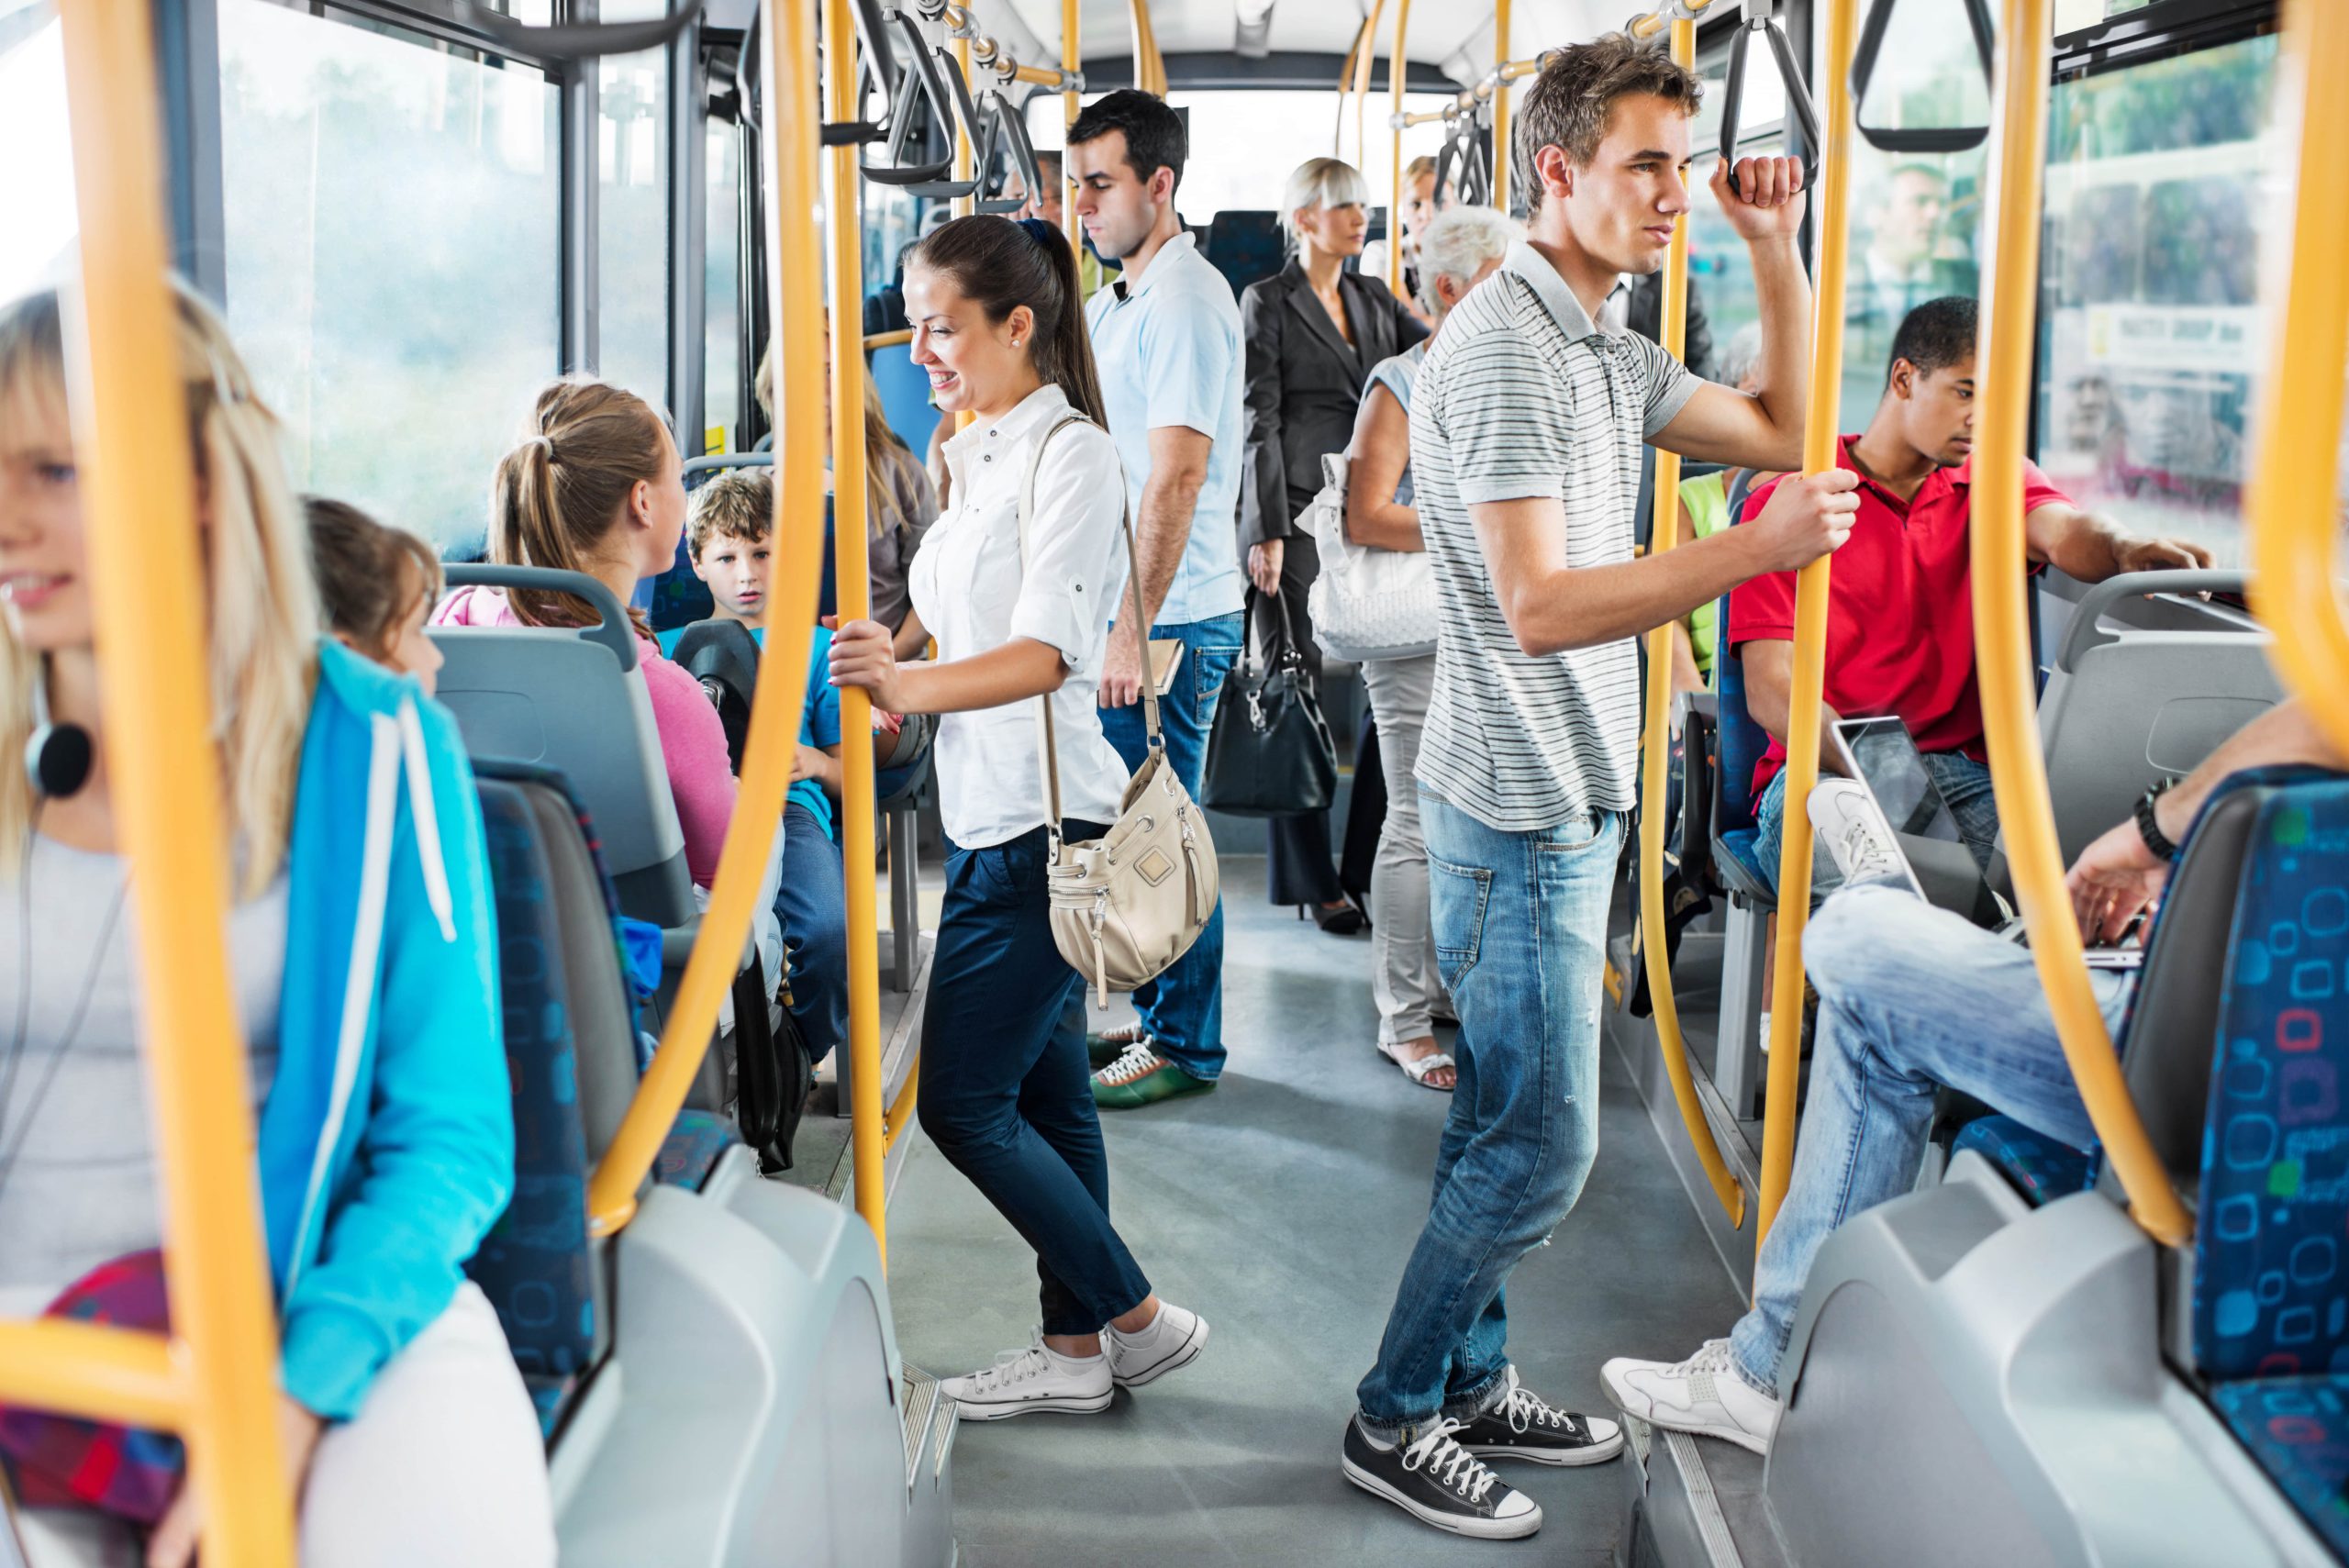 A group of people riding a bus, some standing and some seated.